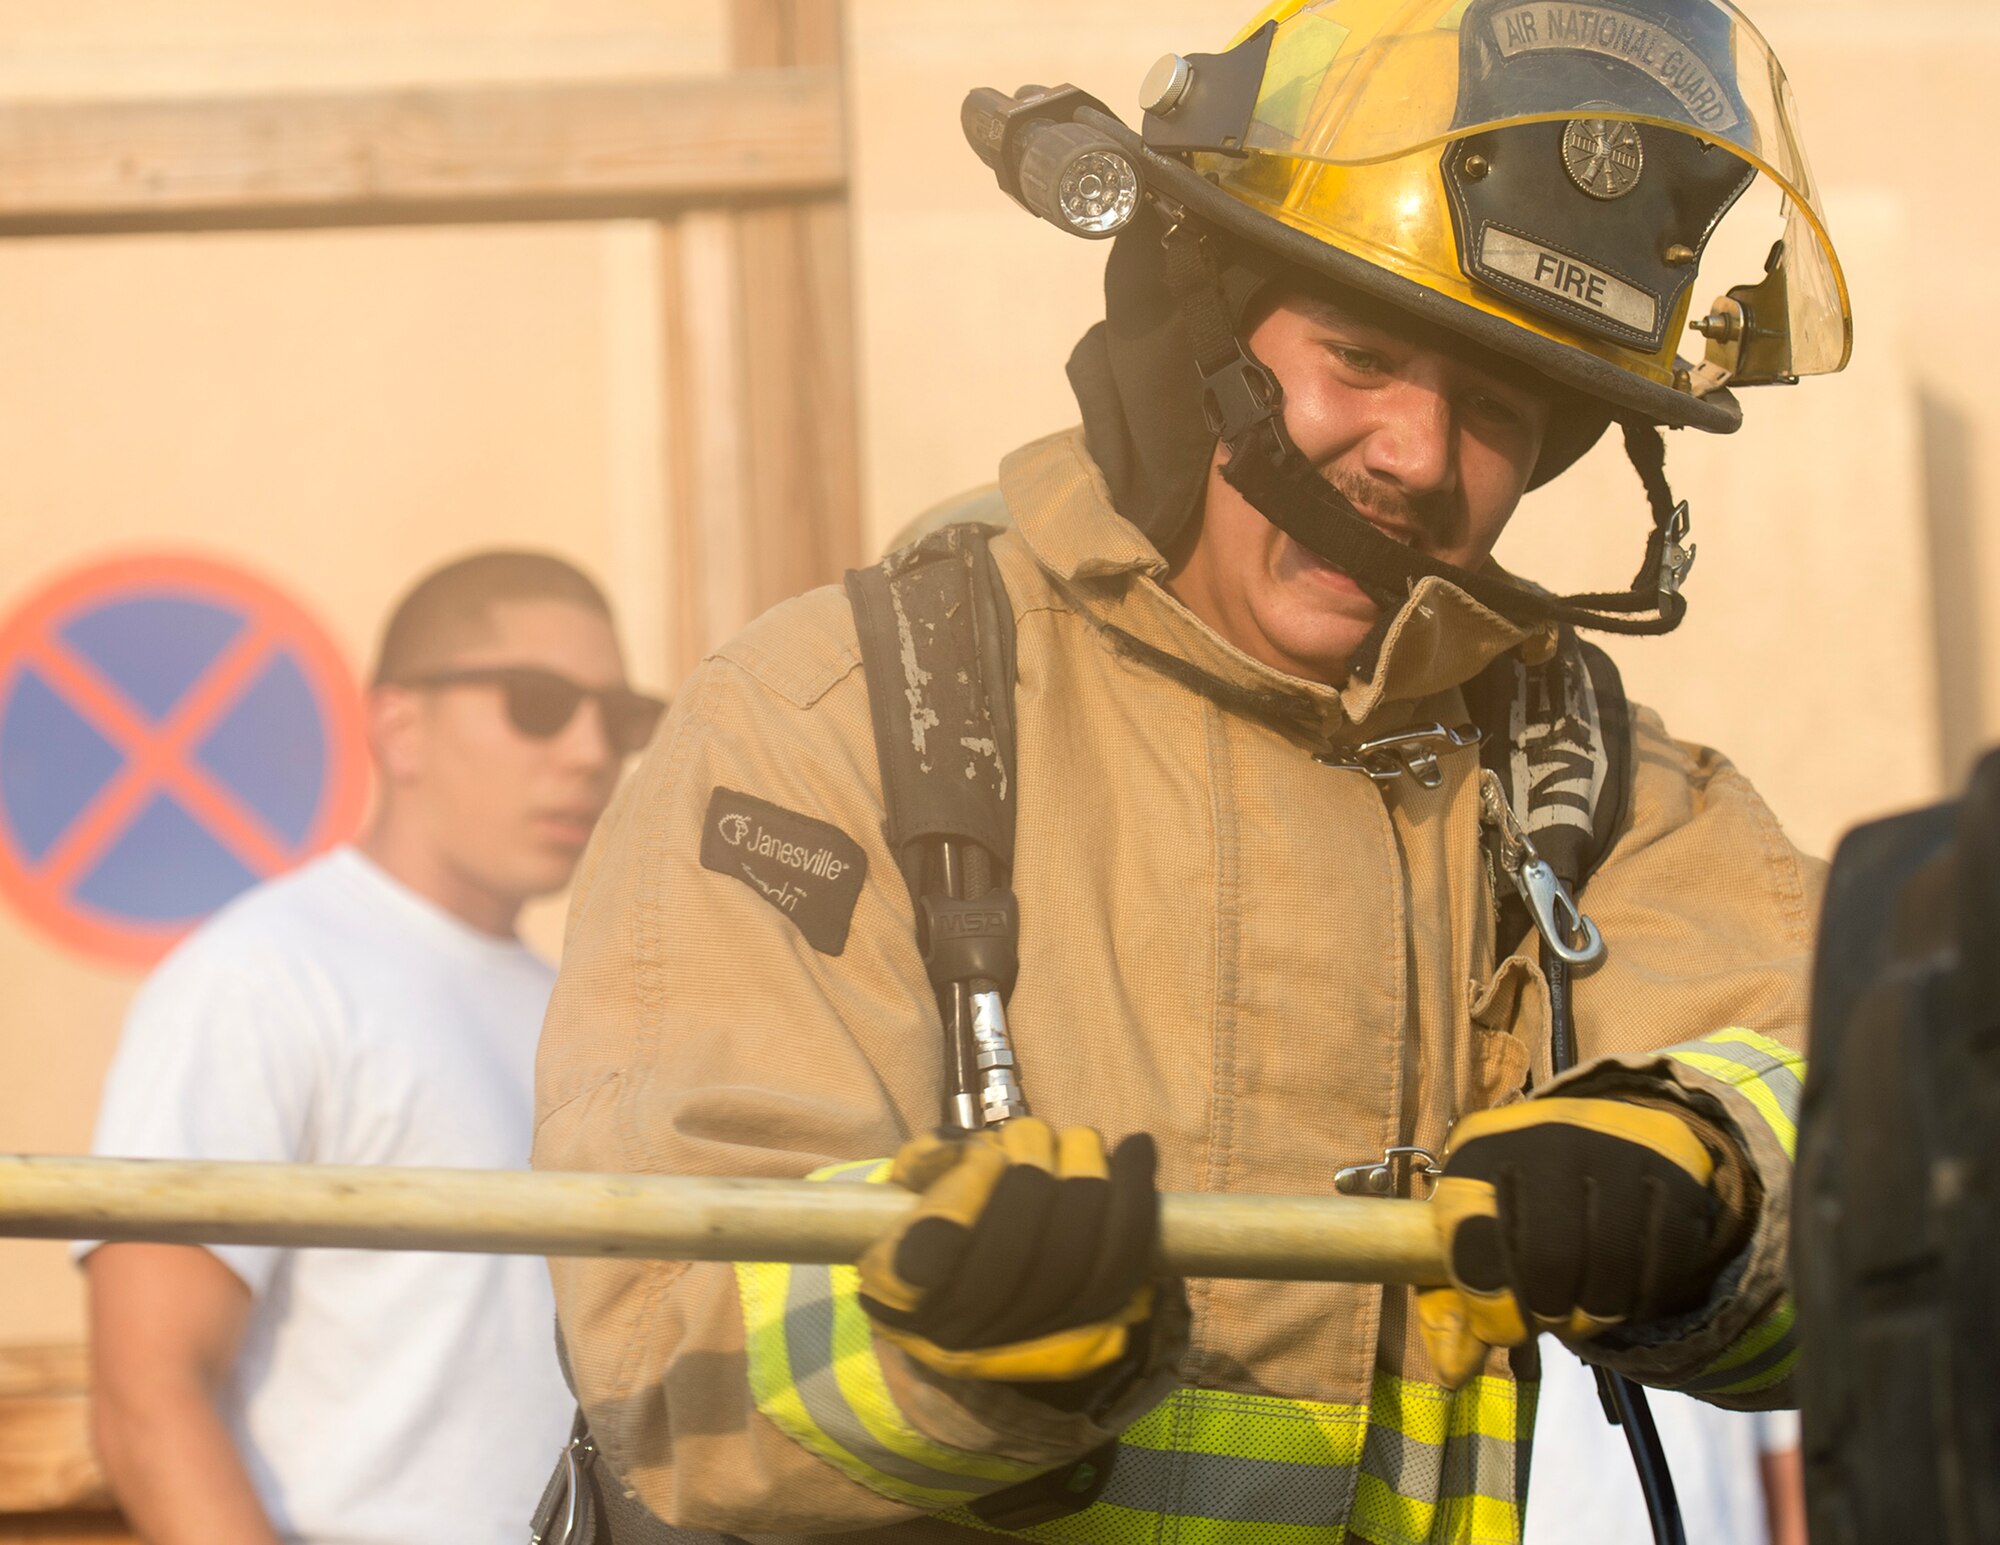 U.S. Air Force Senior Airman John Hodgkins, firefighter with the 379th Expeditionary Civil Engineer Squadron’s Fire and Emergency Services Flight, fits a tire with a slug hammer during a firefighter combat challenge at Al Udeid Air Base, Qatar, Sept. 1, 2017.